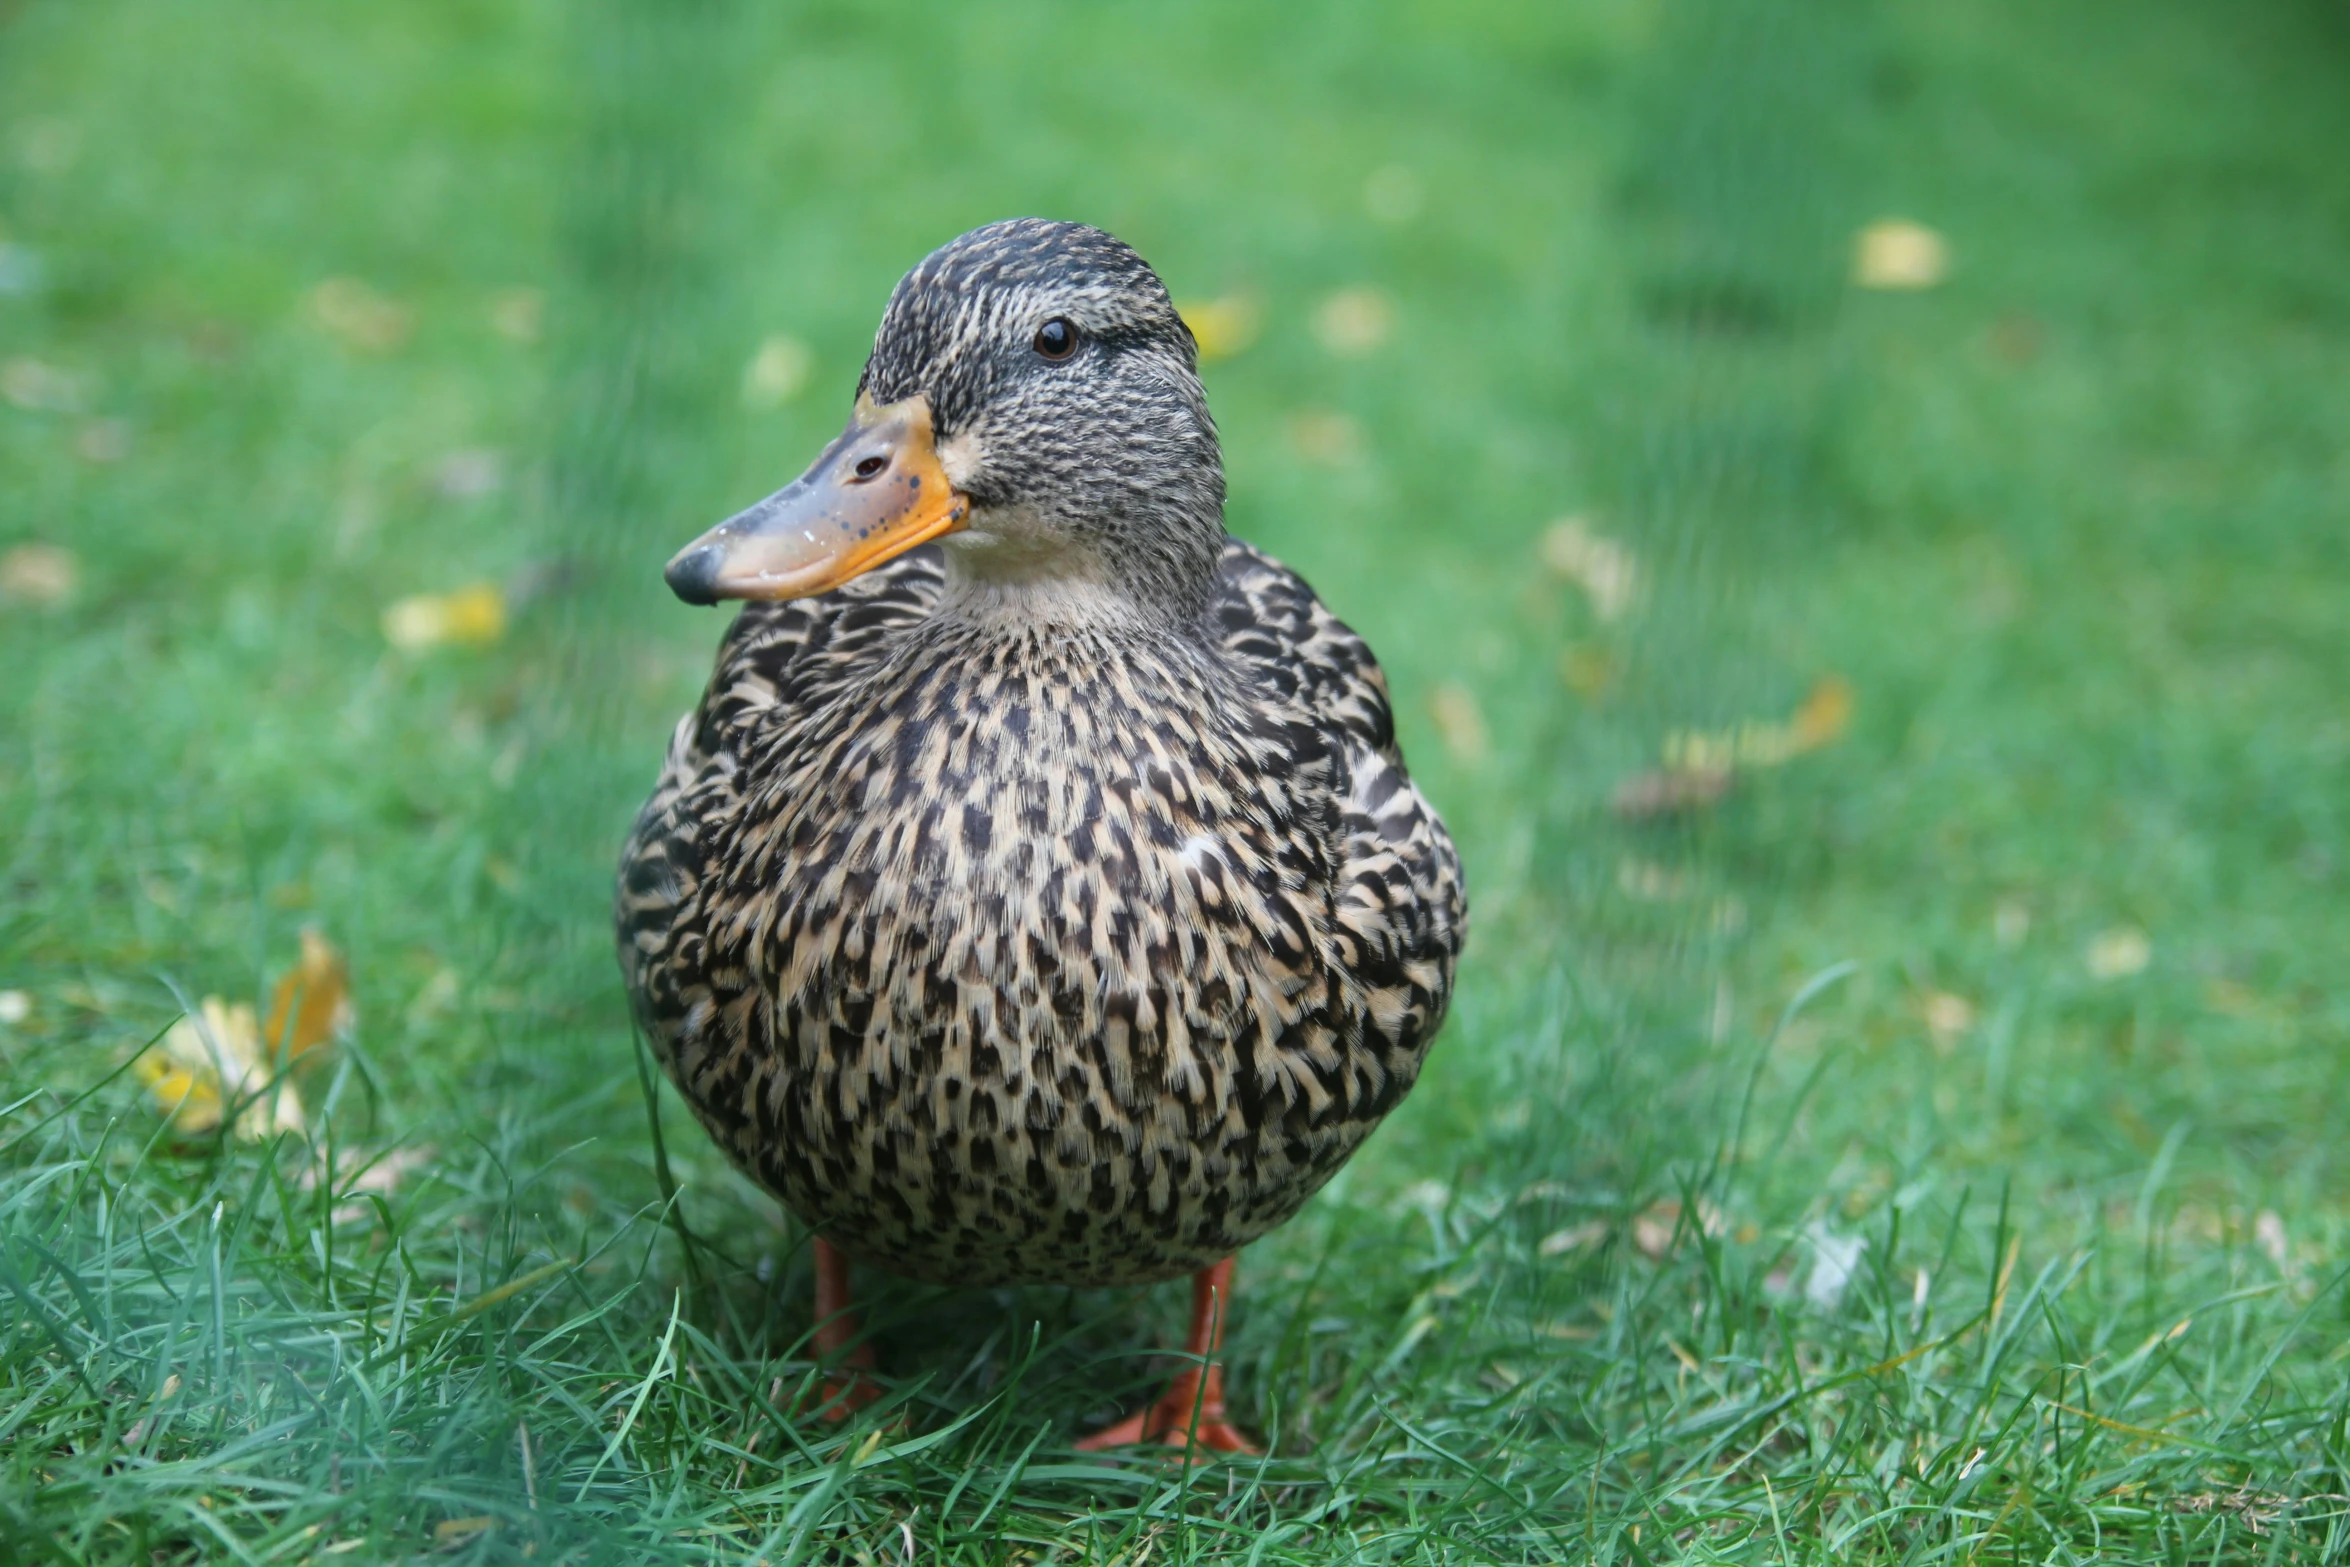 this is a close up of a duck in a field